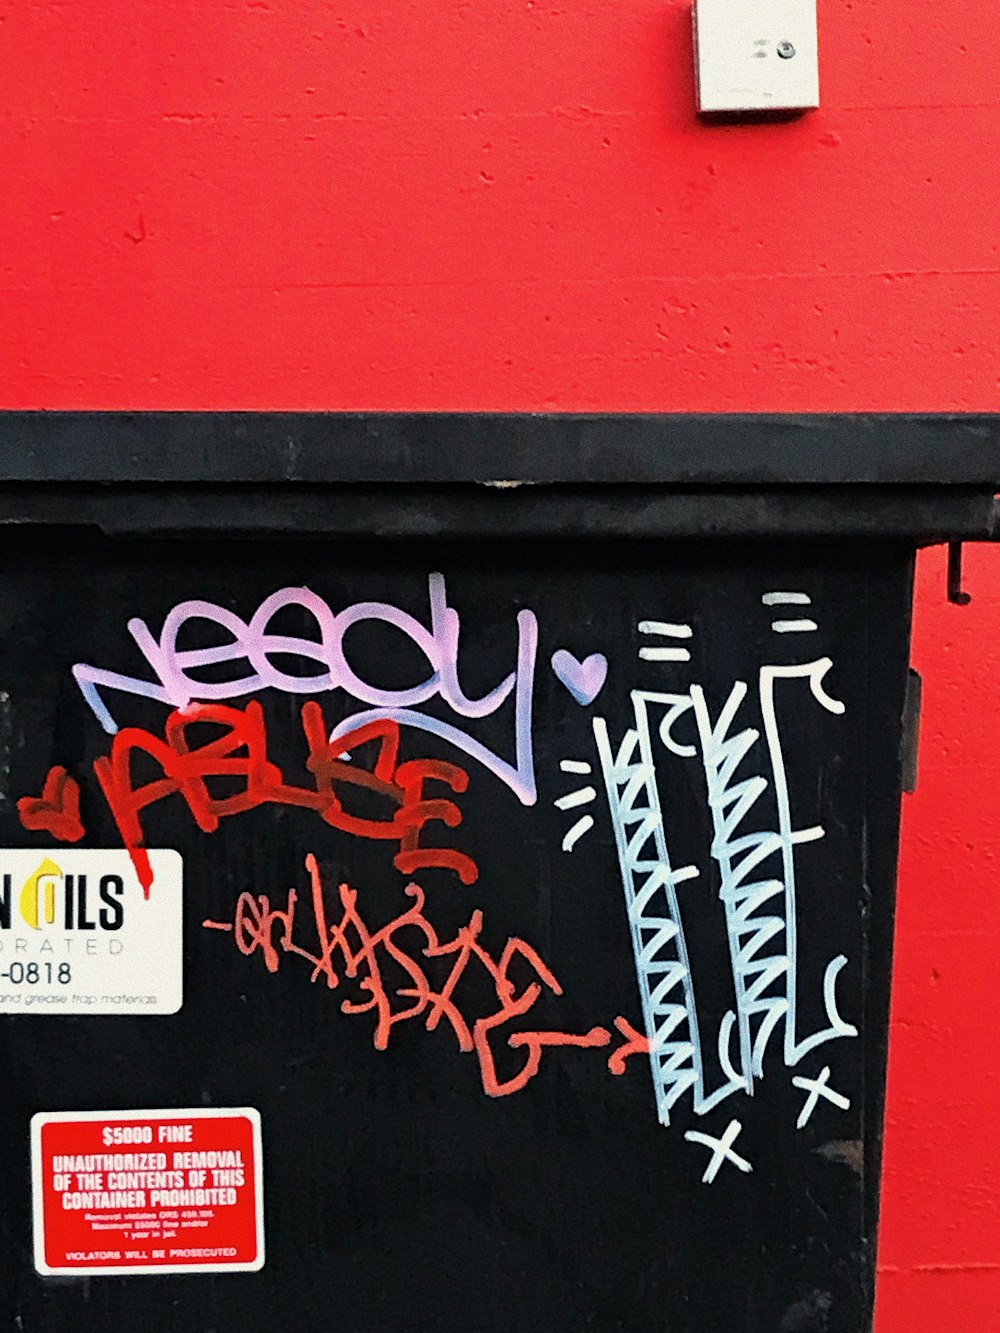 a red wall with a black door and some graffiti on it